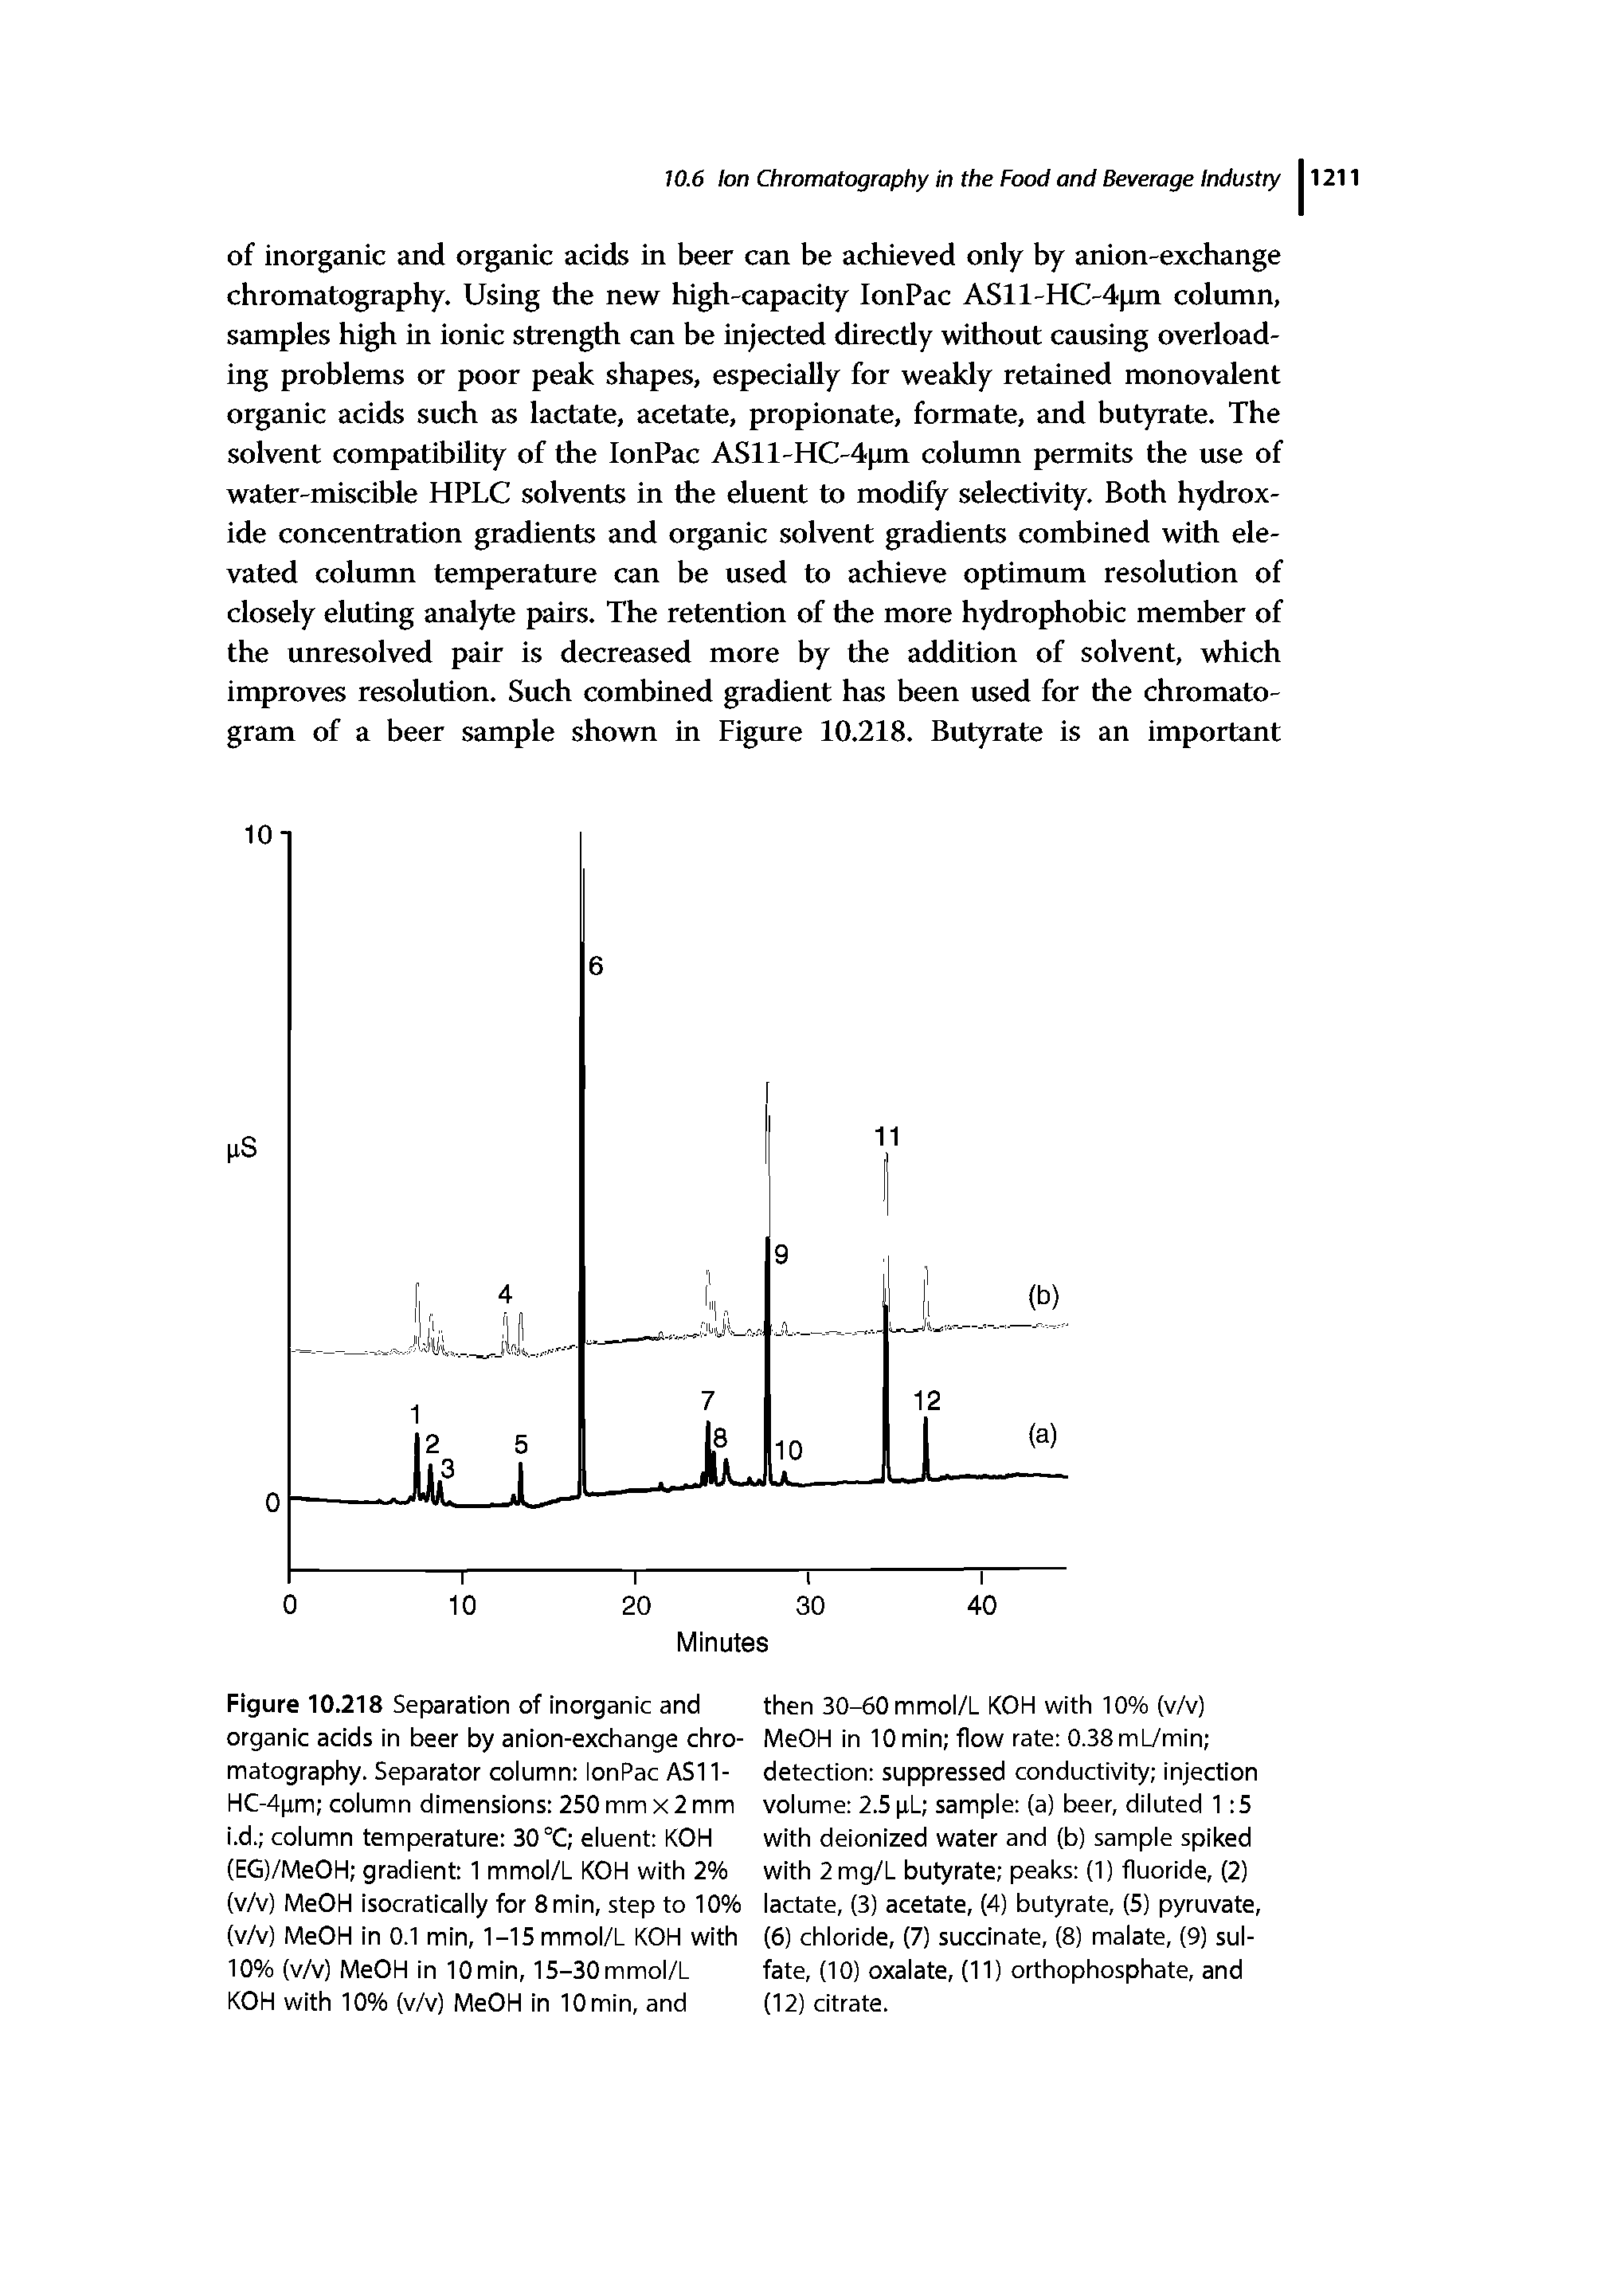 Figure 10.218 Separation of inorganic and organic acids in beer by anion-exchange chromatography. Separator column lonPac AS11-HC-4pm column dimensions 250 mm x 2 mm i.d. column temperature 30 °C eluent KOH (EG)/MeOH gradient 1 mmol/L KOH with 2% (v/v) MeOH isocratically for 8 min, step to 10% (v/v) MeOH in 0.1 min, 1-15 mmol/L KOH with 10% (v/v) MeOH in lOmin, 15-30mmol/L KOH with 10% (v/v) MeOH in 10 min, and...